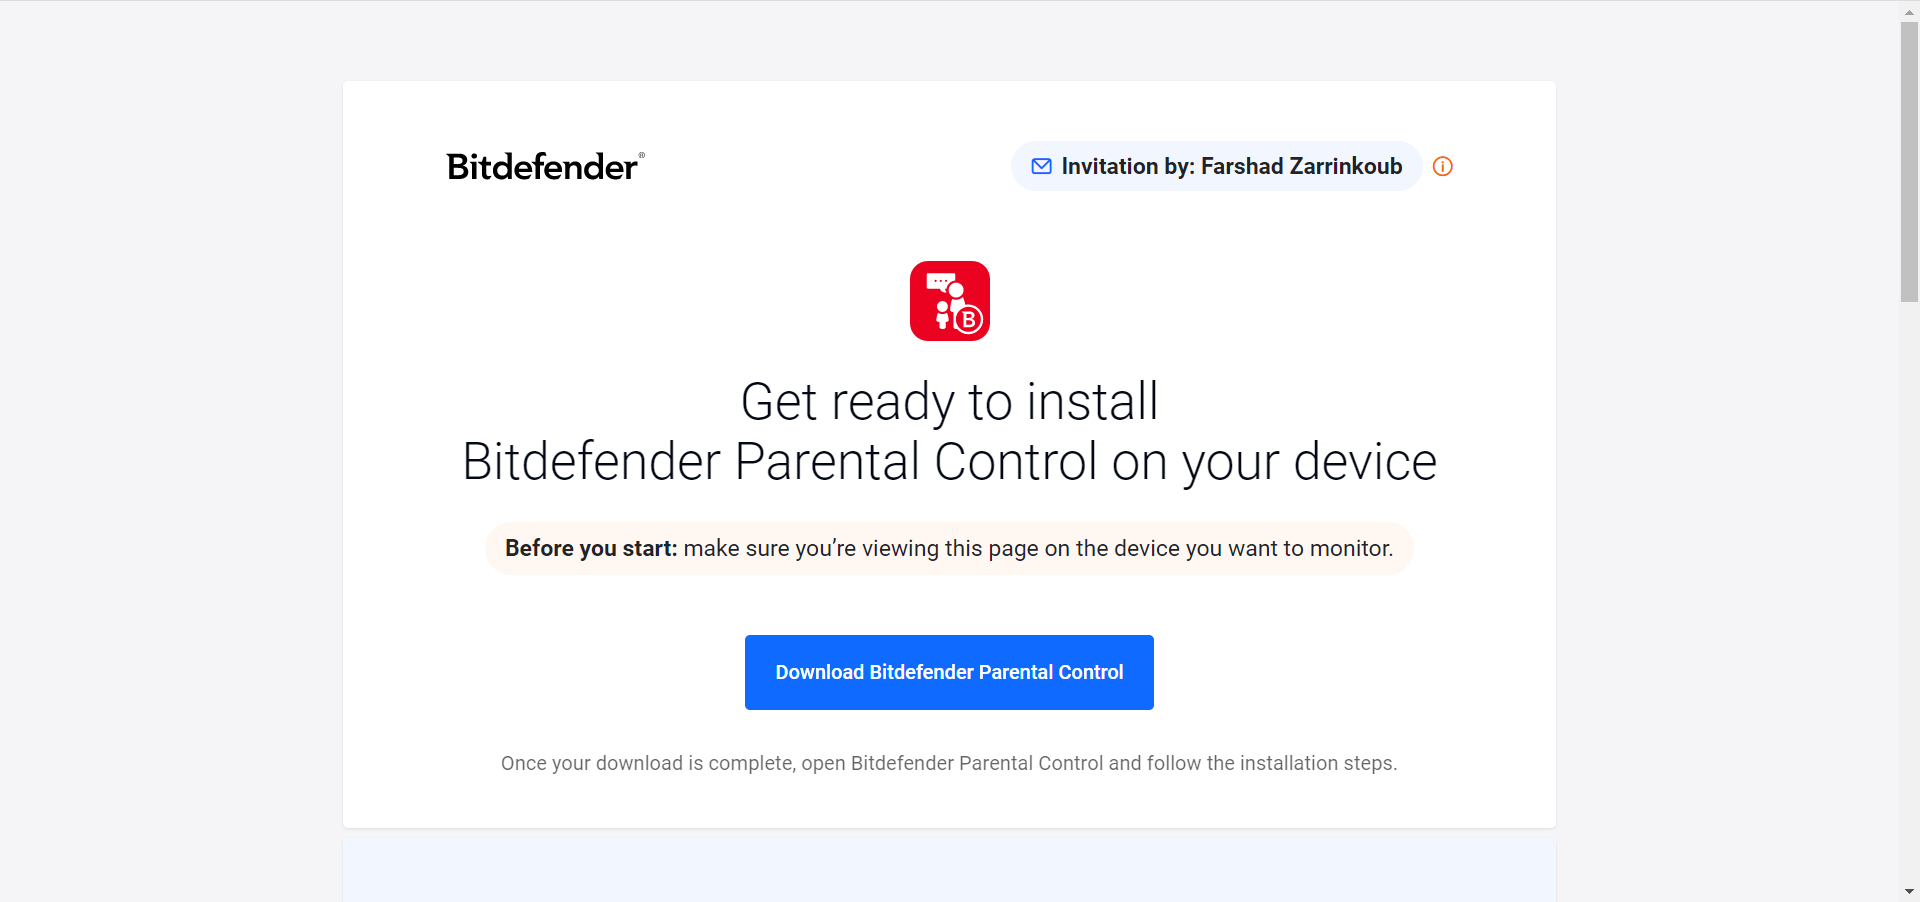 Installation Kit Will Save on Child Device After You Click on Download Link